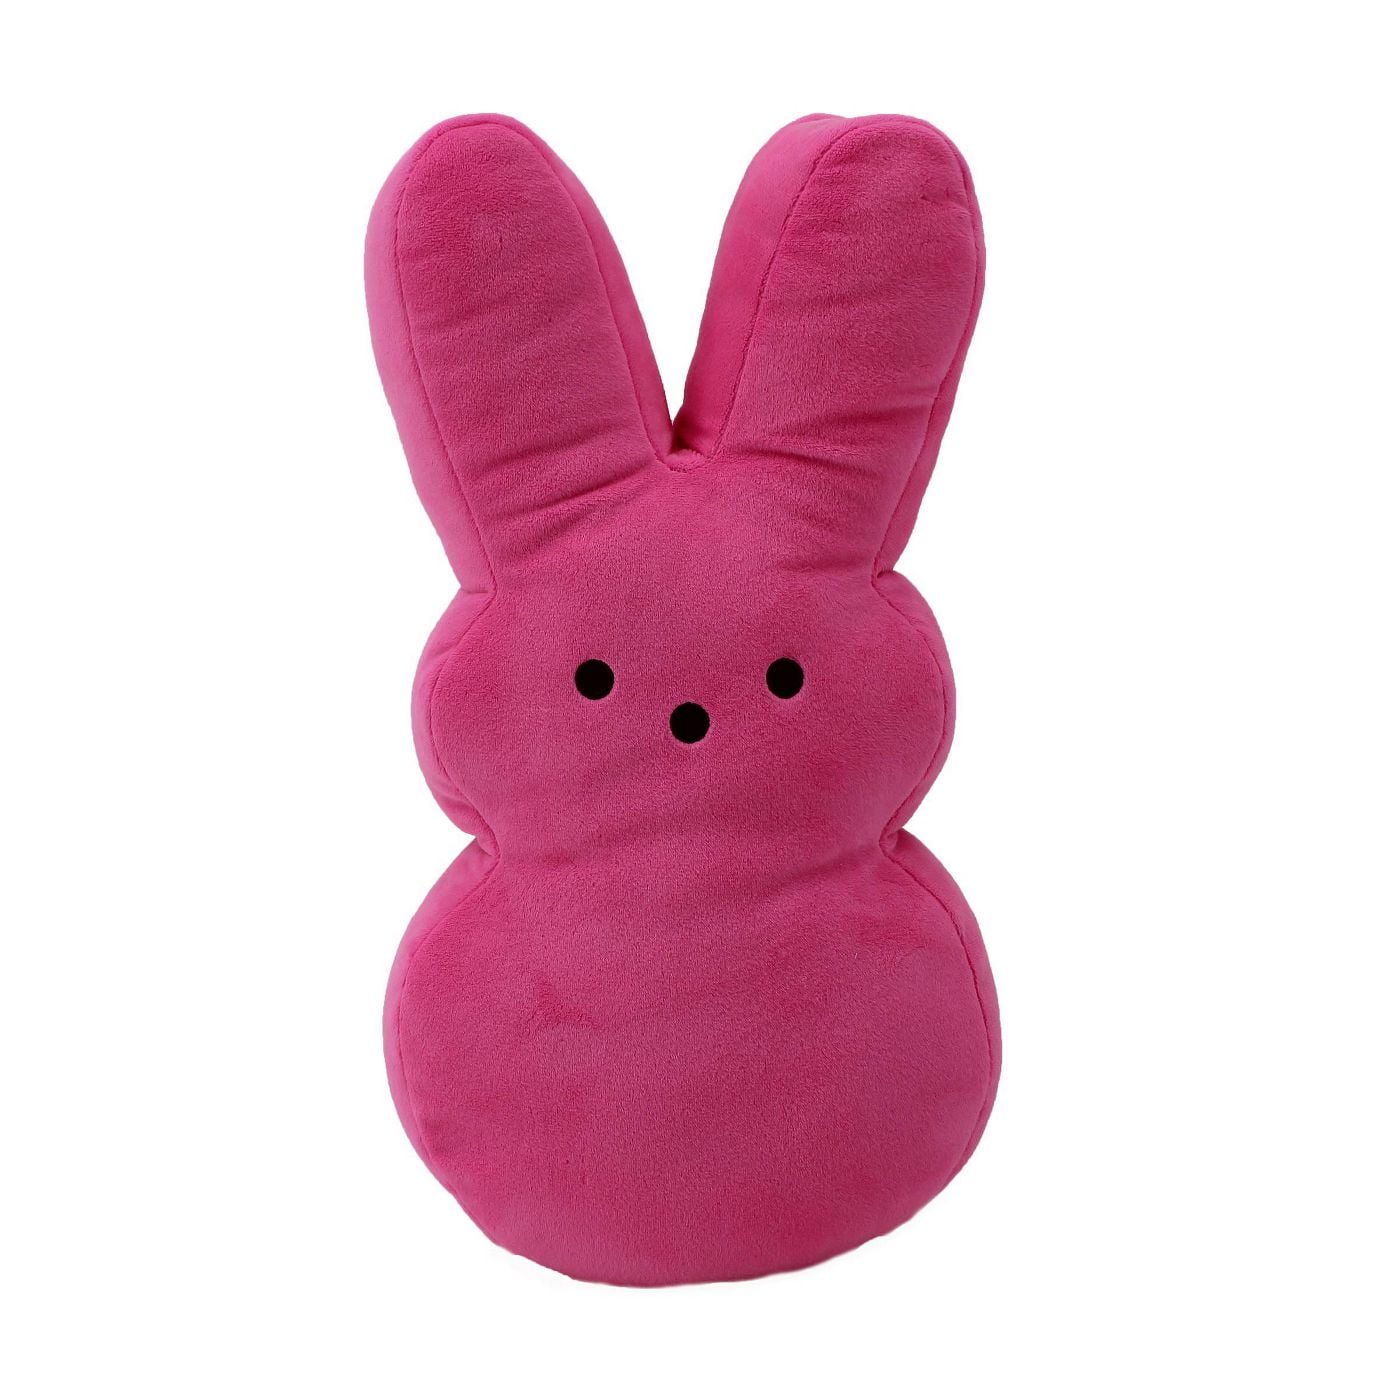 PEEPS Plush Easter Bunny with Marshmallow Candy Pink New 